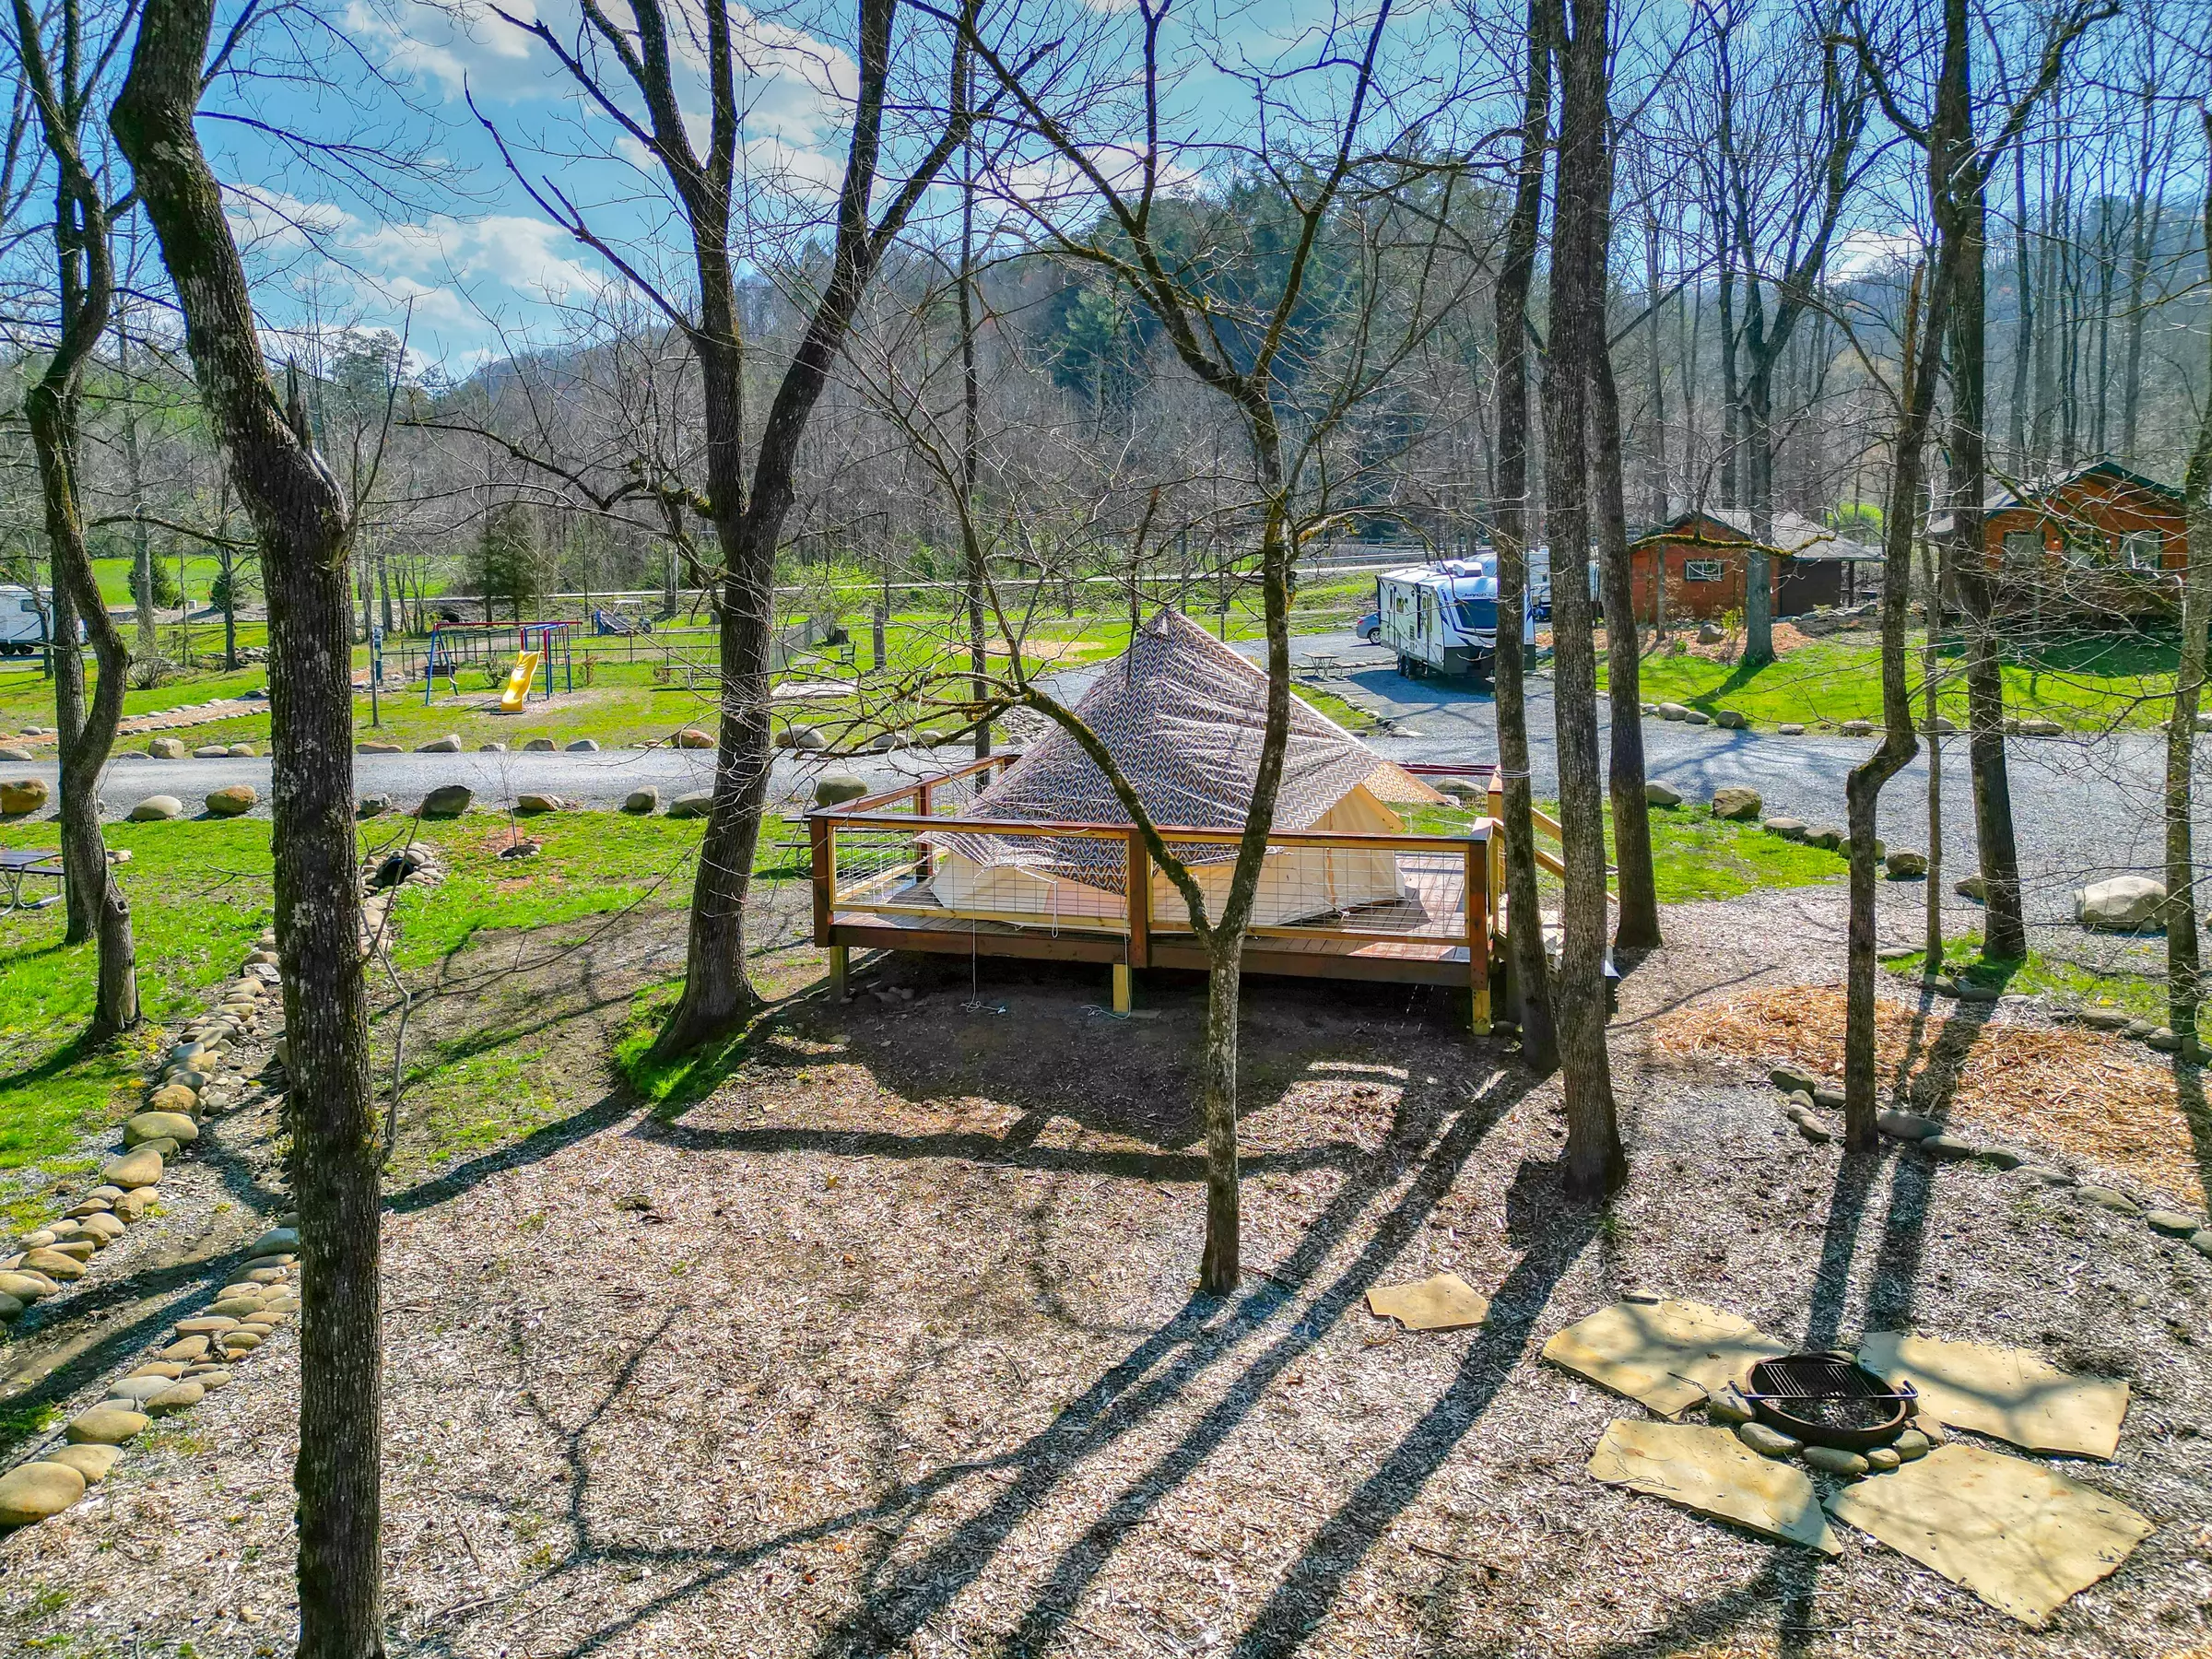 Bell tent at Greenbrier Campground in the Smoky Mountains